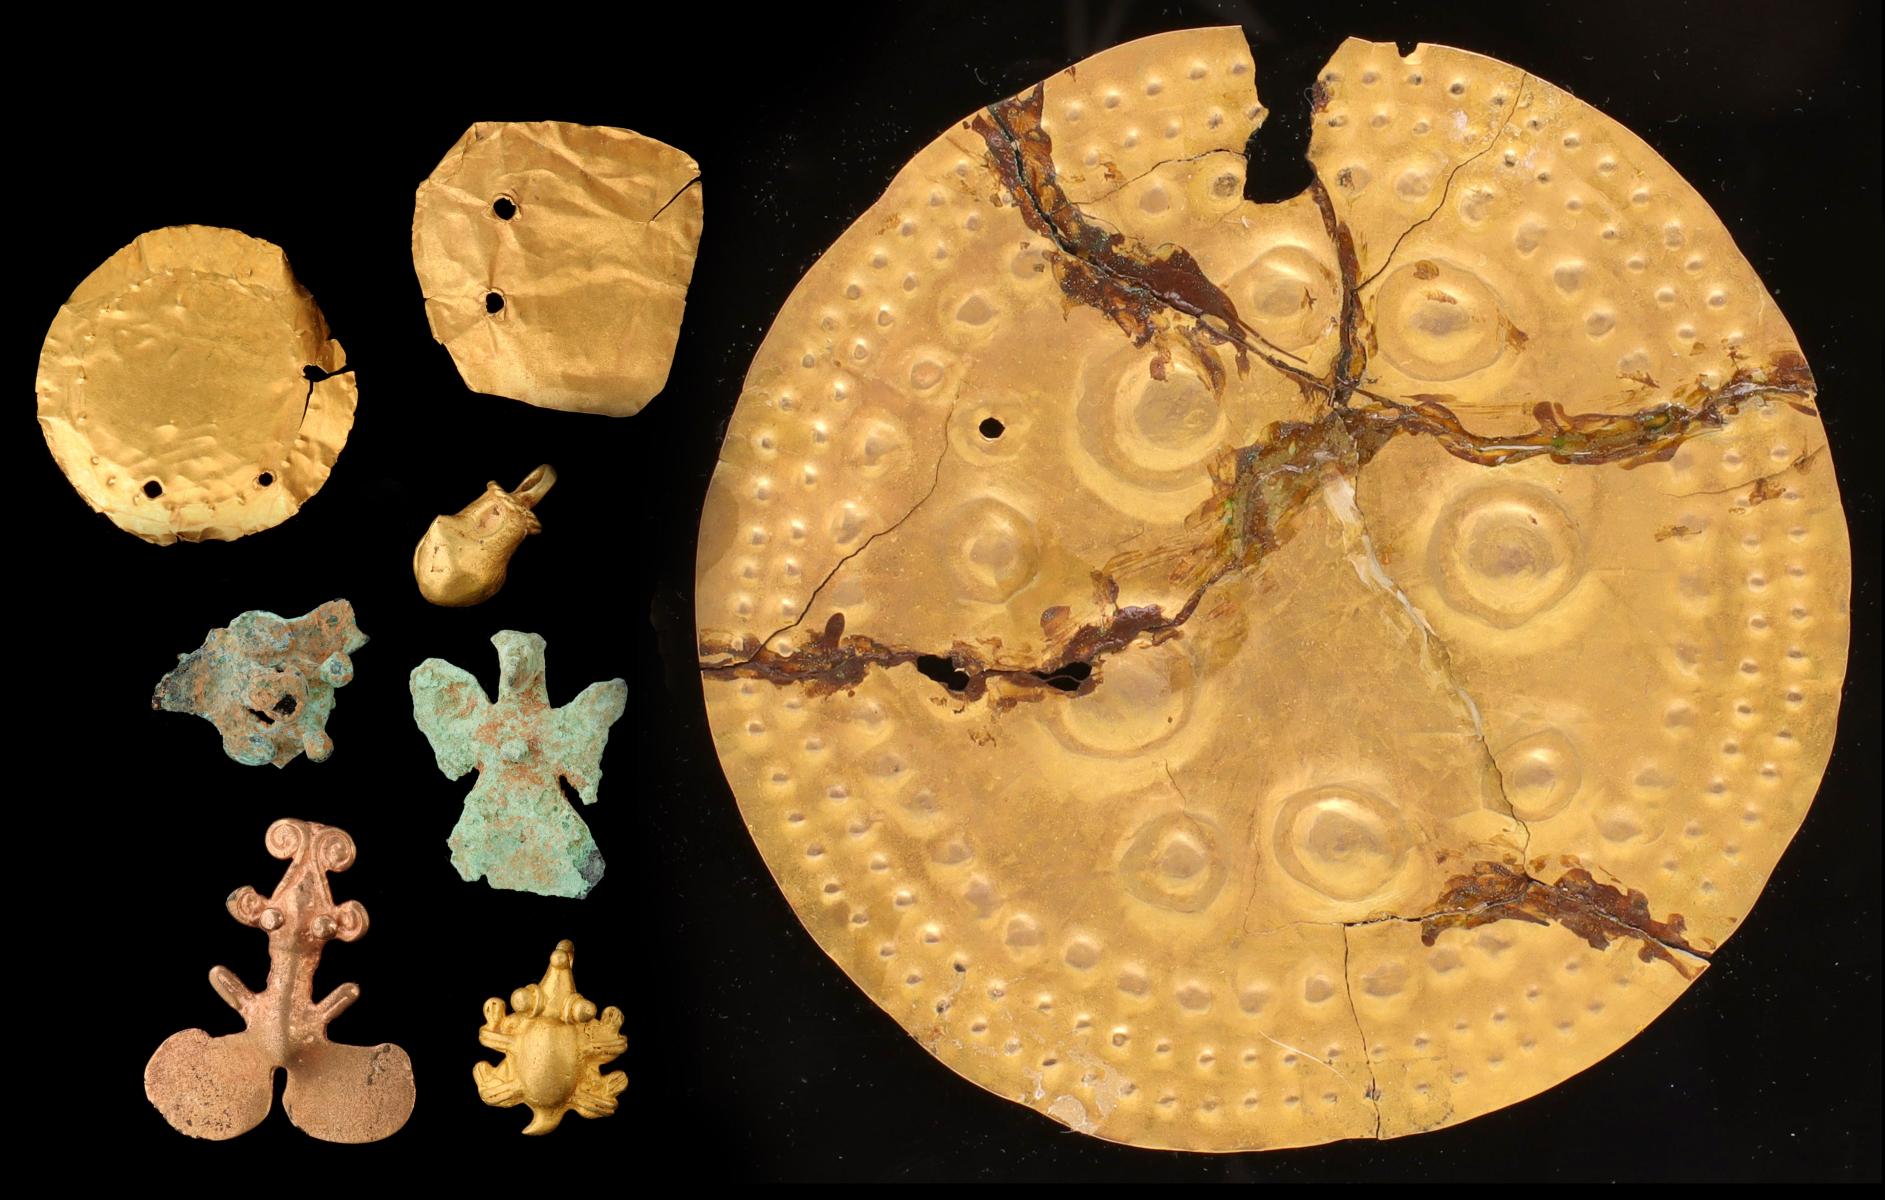 CENTRAL AMERICAN PRE-COLUMBIAN GOLD DISCS AND ORNAMENTS